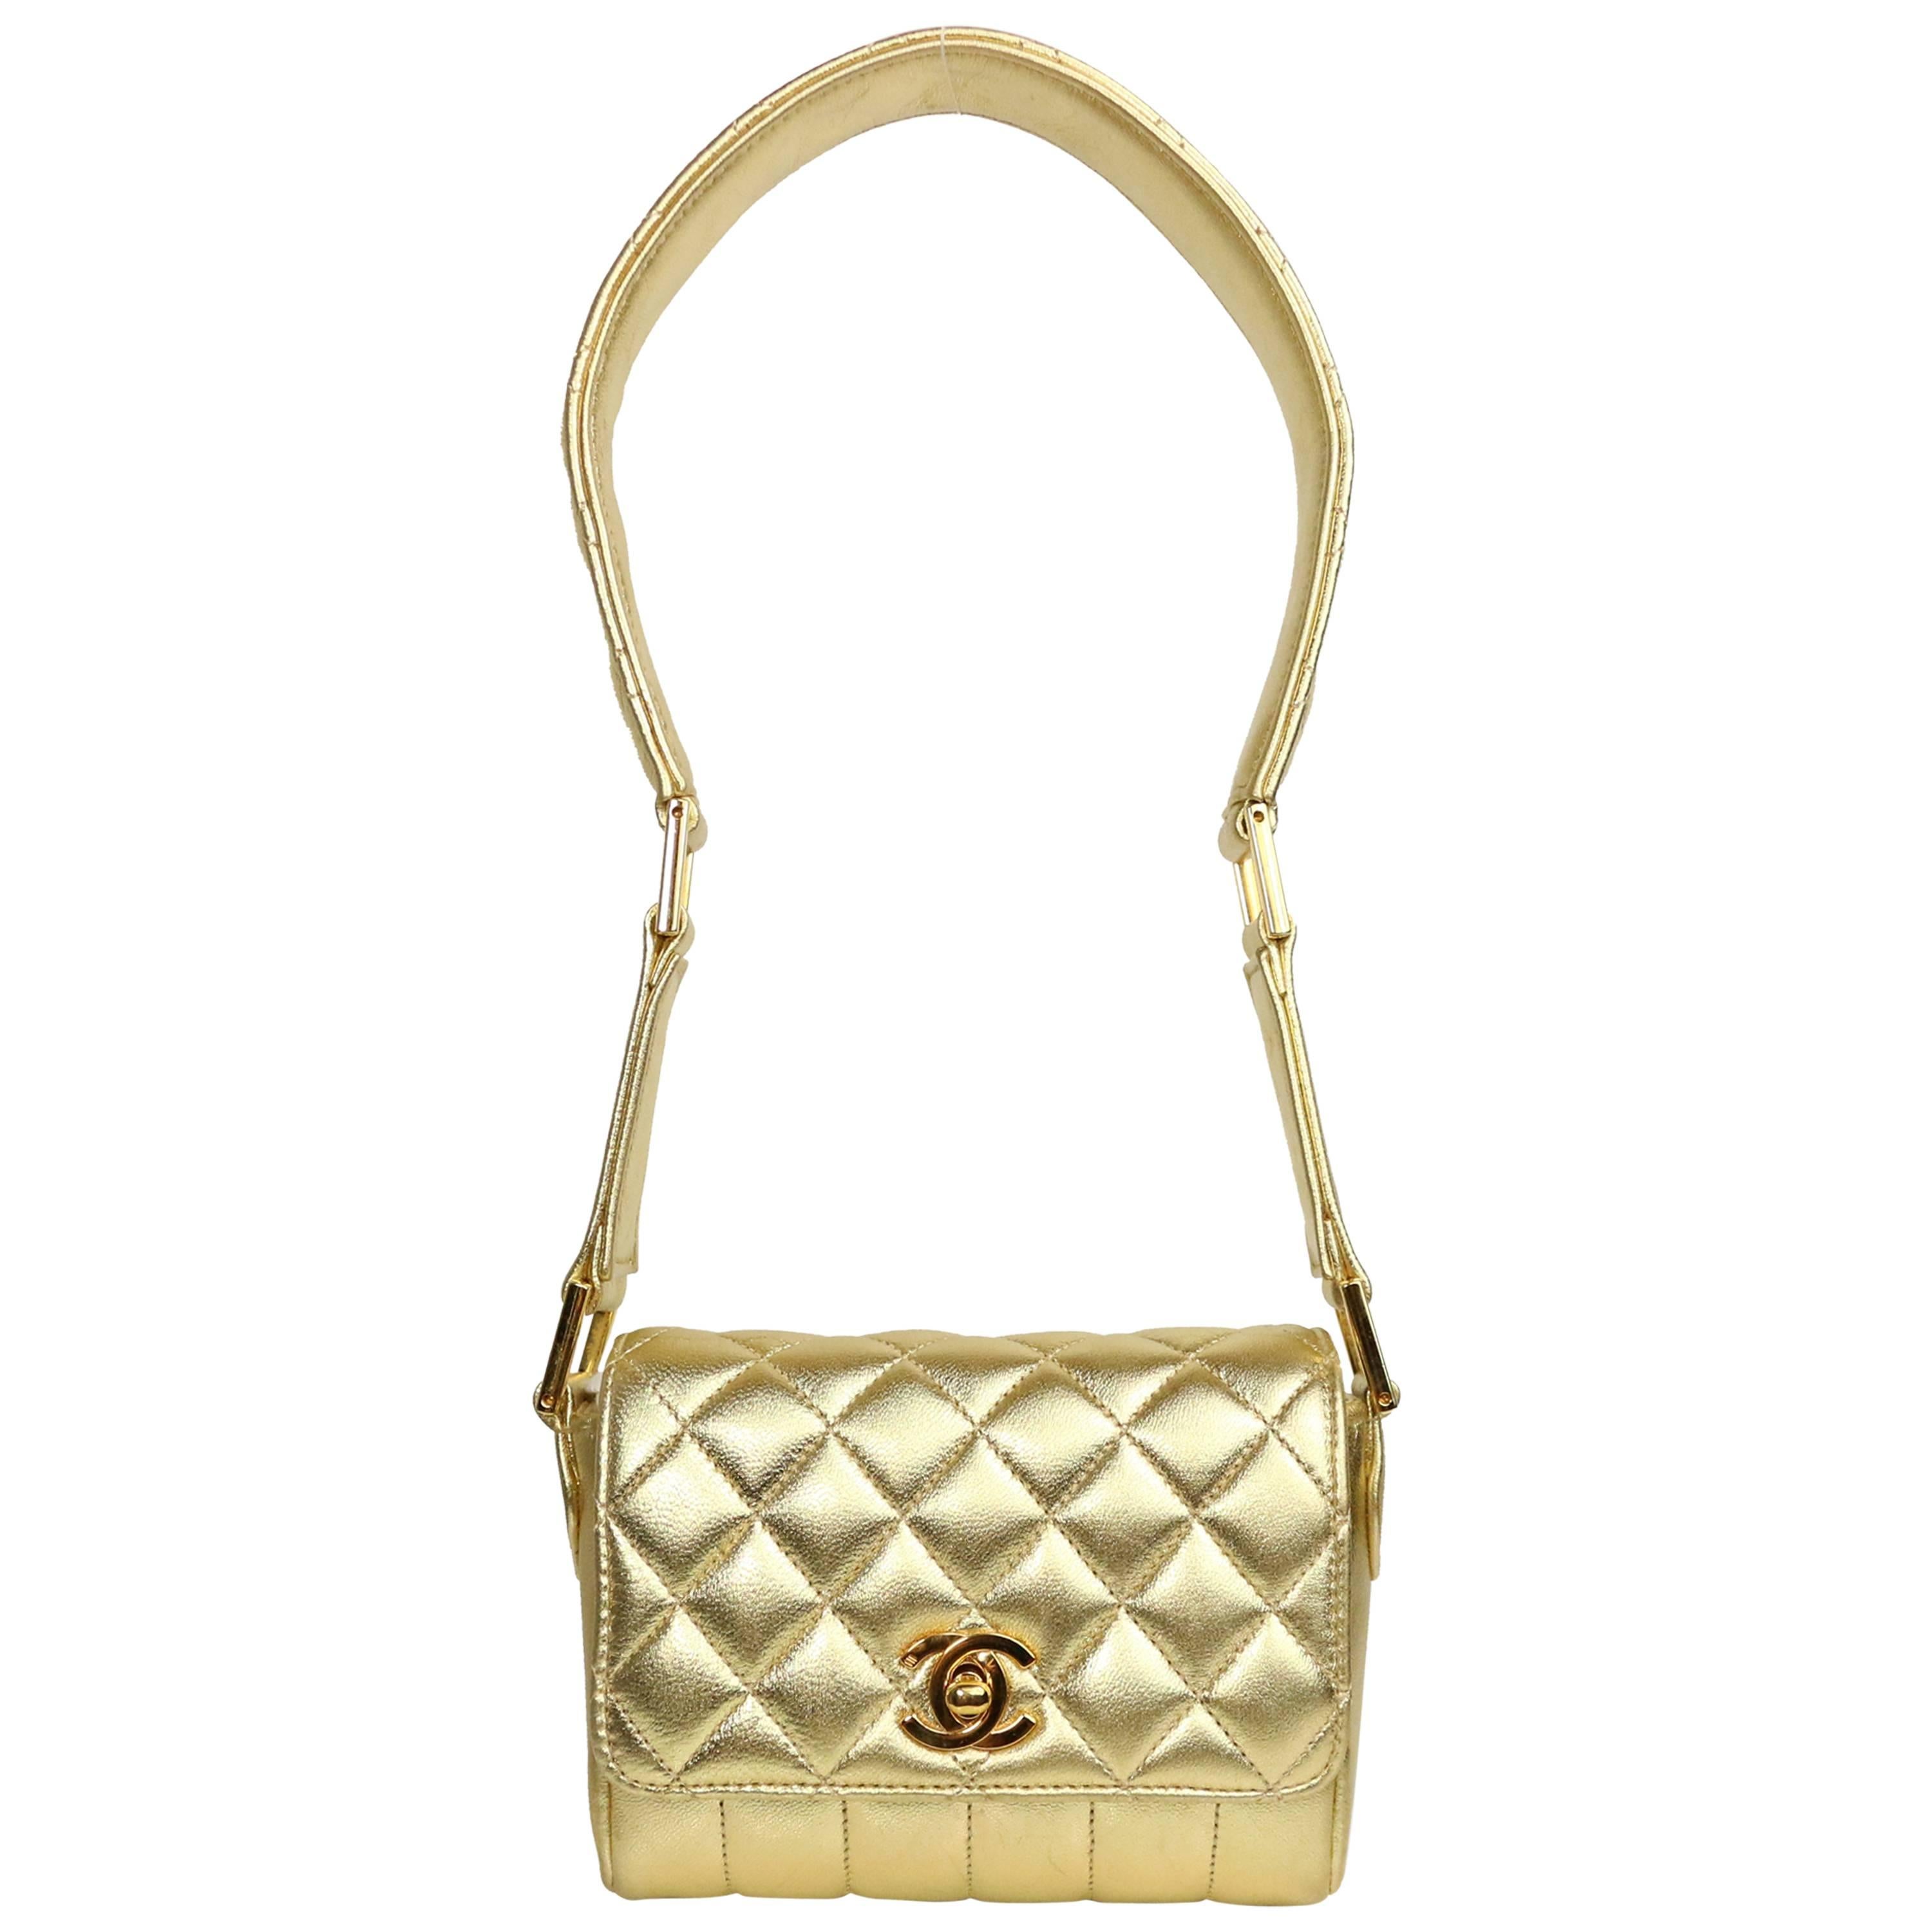 Chanel Gold Metallic Lambskin Quilted Flap Shoulder Bag For Sale